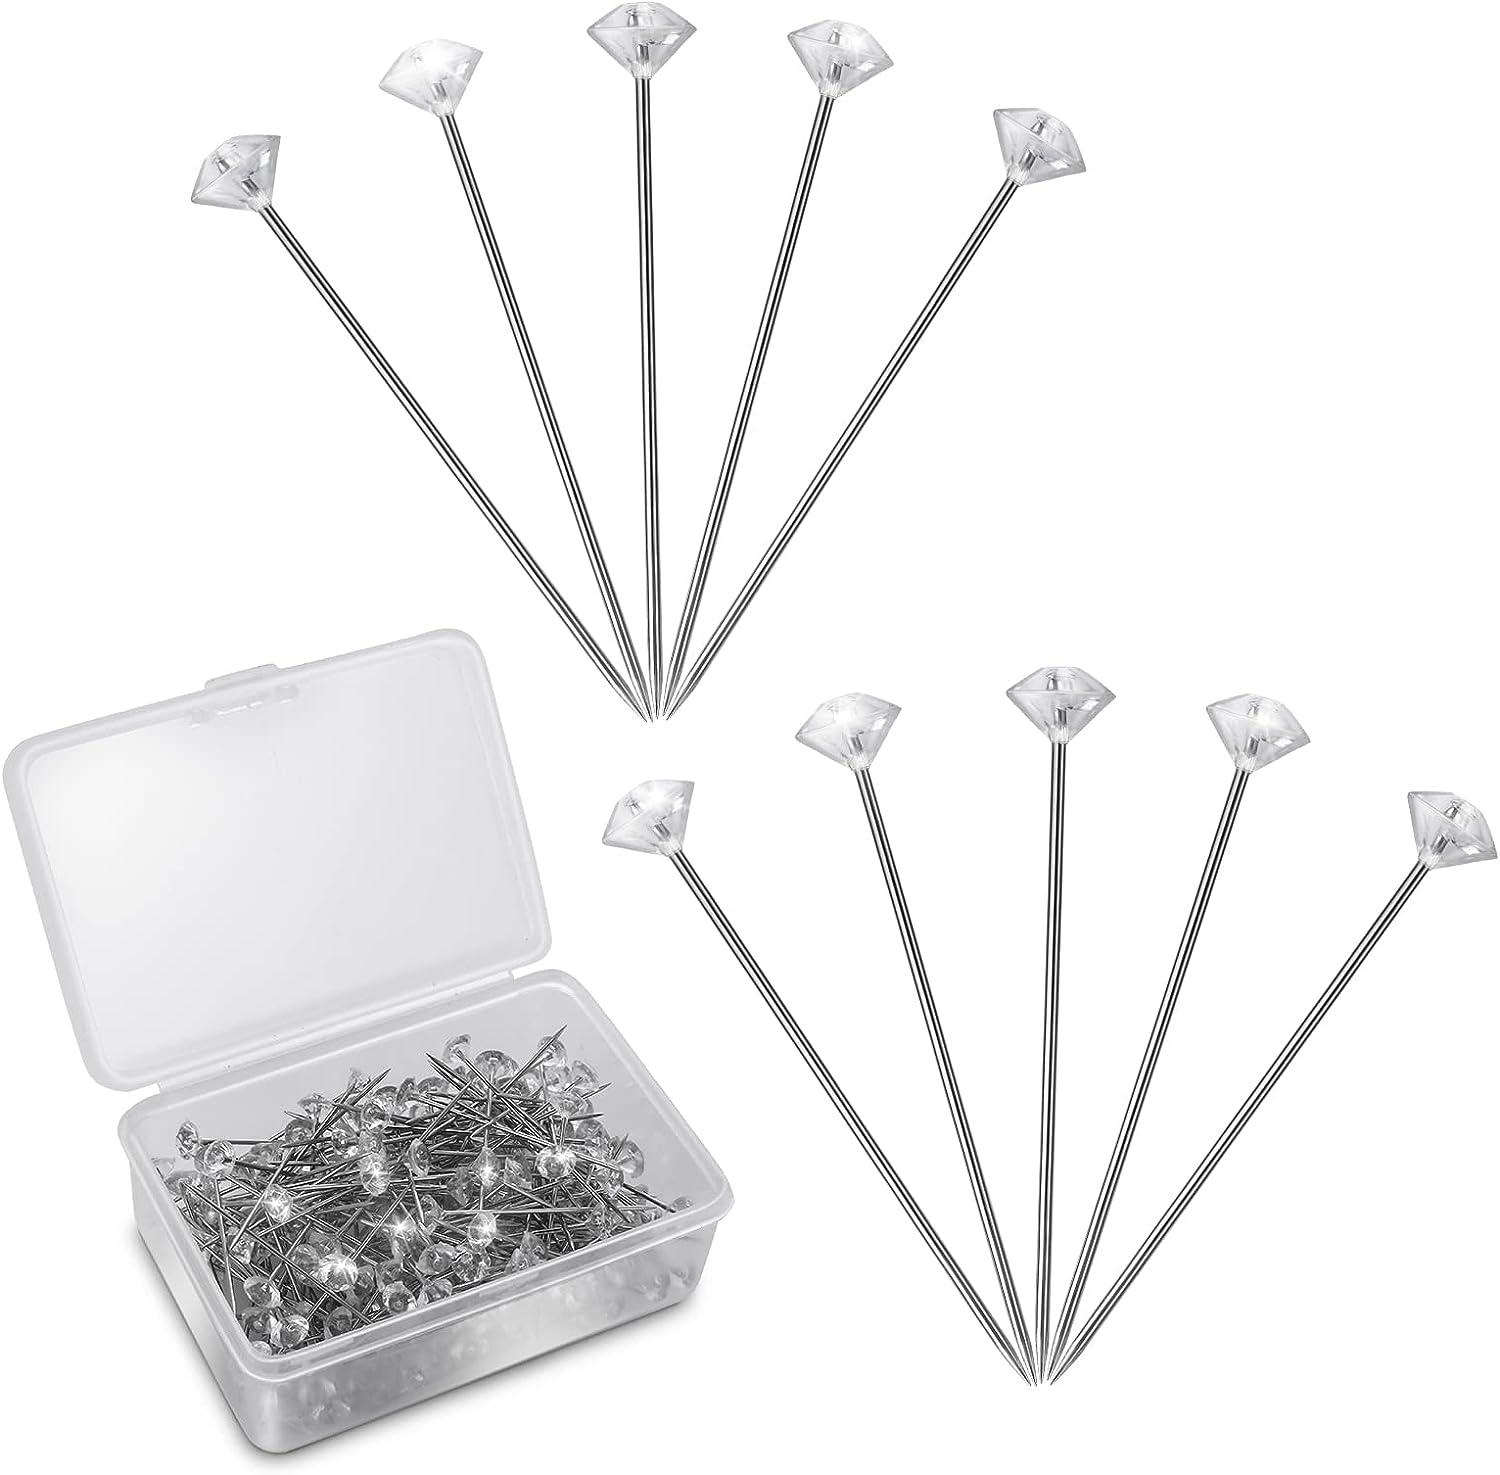  200Pcs Corsage Boutonniere Pins- 1.5 Inch Crystal Diamond  Clear Straight Pins- Sewing Pins Diamond Pins For Flower Bouquet